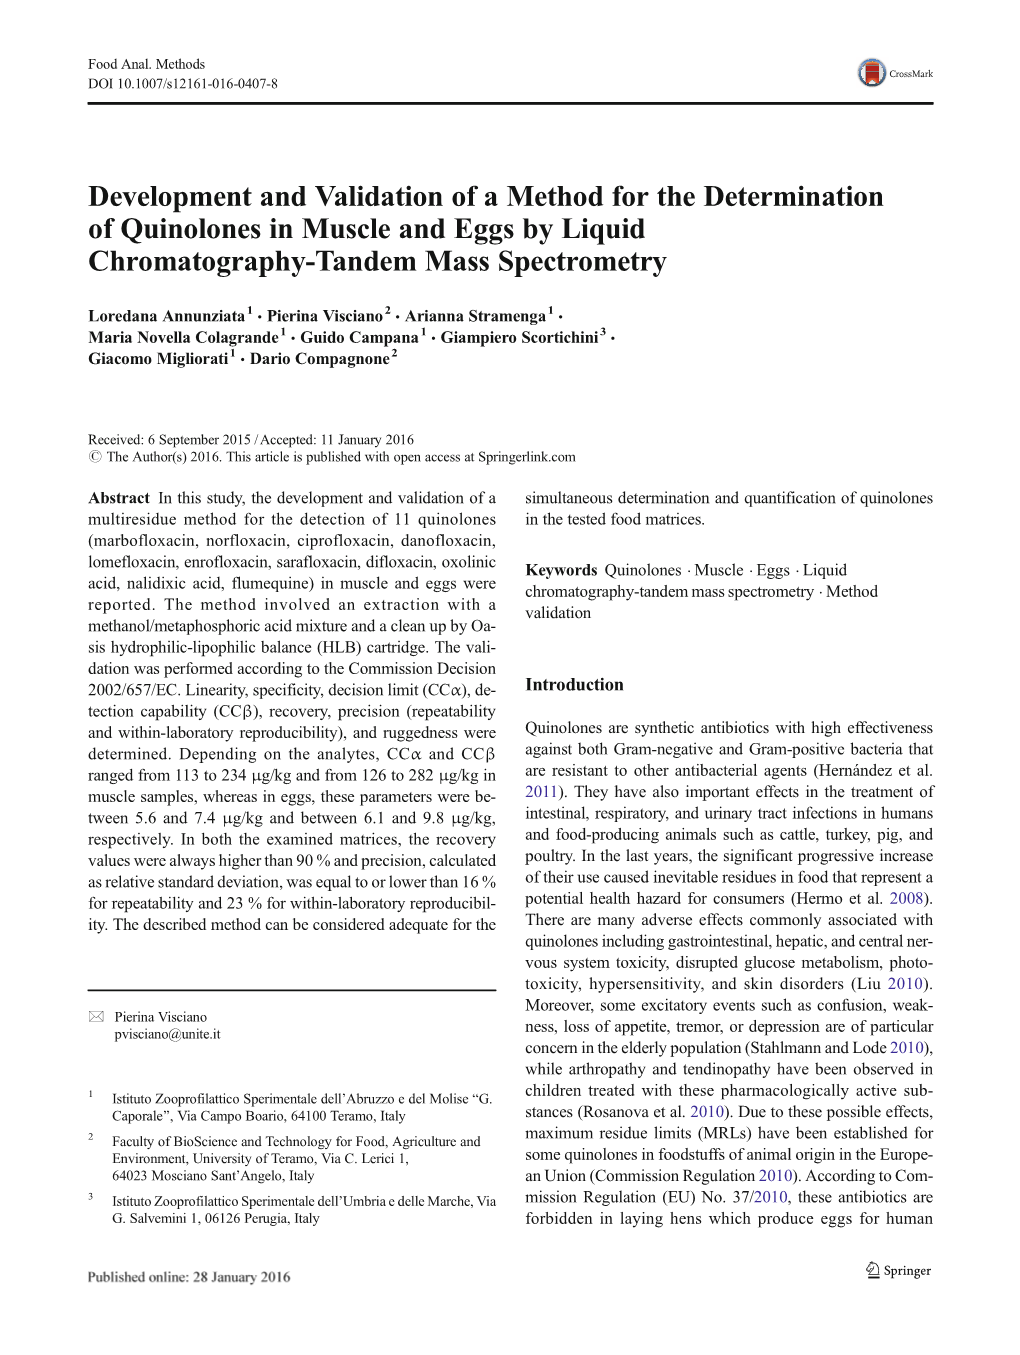 Development and Validation of a Method for the Determination of Quinolones in Muscle and Eggs by Liquid Chromatography-Tandem Mass Spectrometry